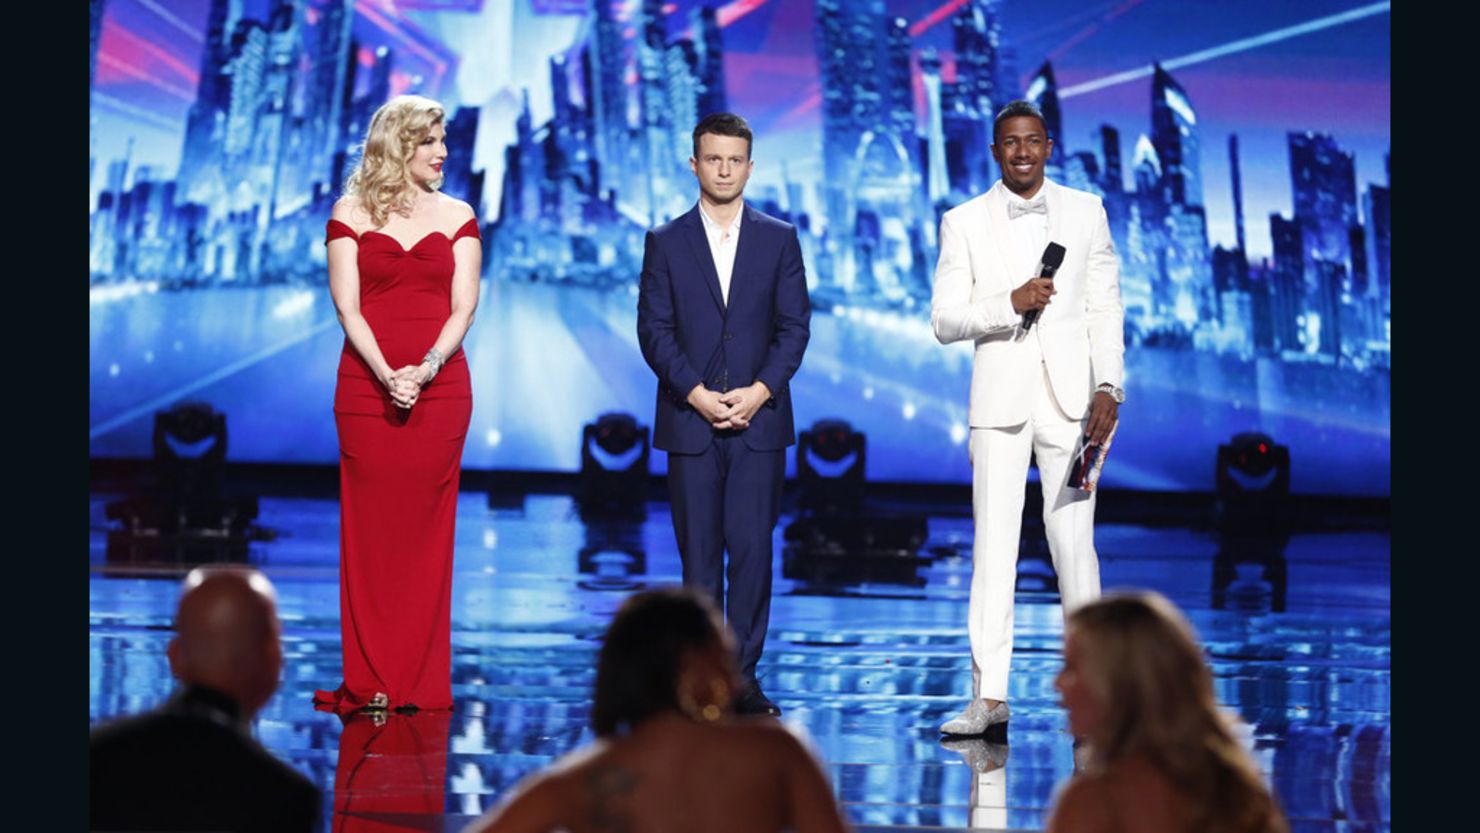 "America's Got Talent" contestants Emily West and Mat Franco, center, join host Nick Cannon during Wednesday's finale.